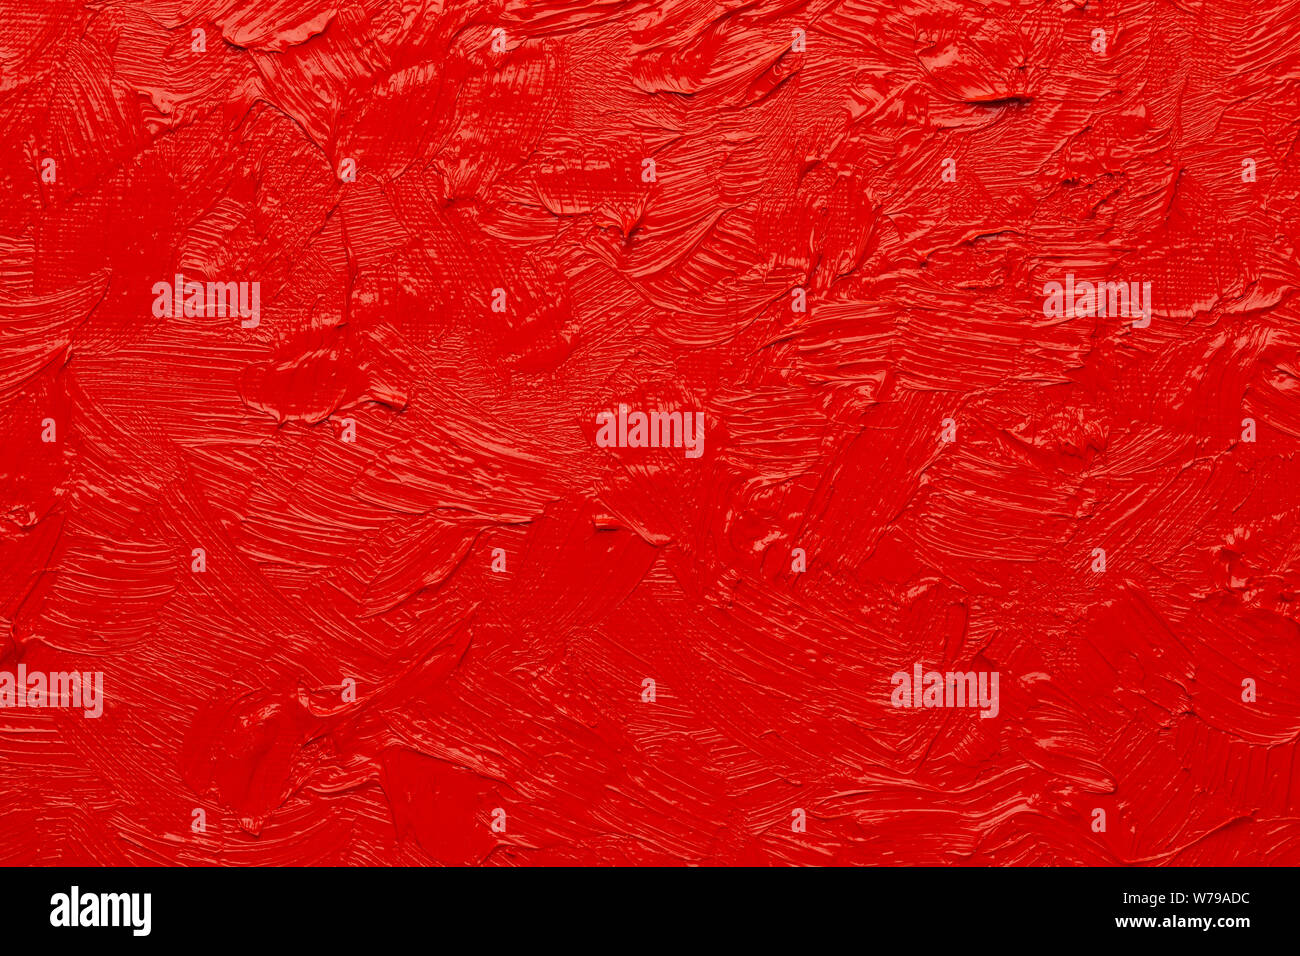 Abstract painting background. Background was painted with red vermillion oil color on canvas by hand. Stock Photo